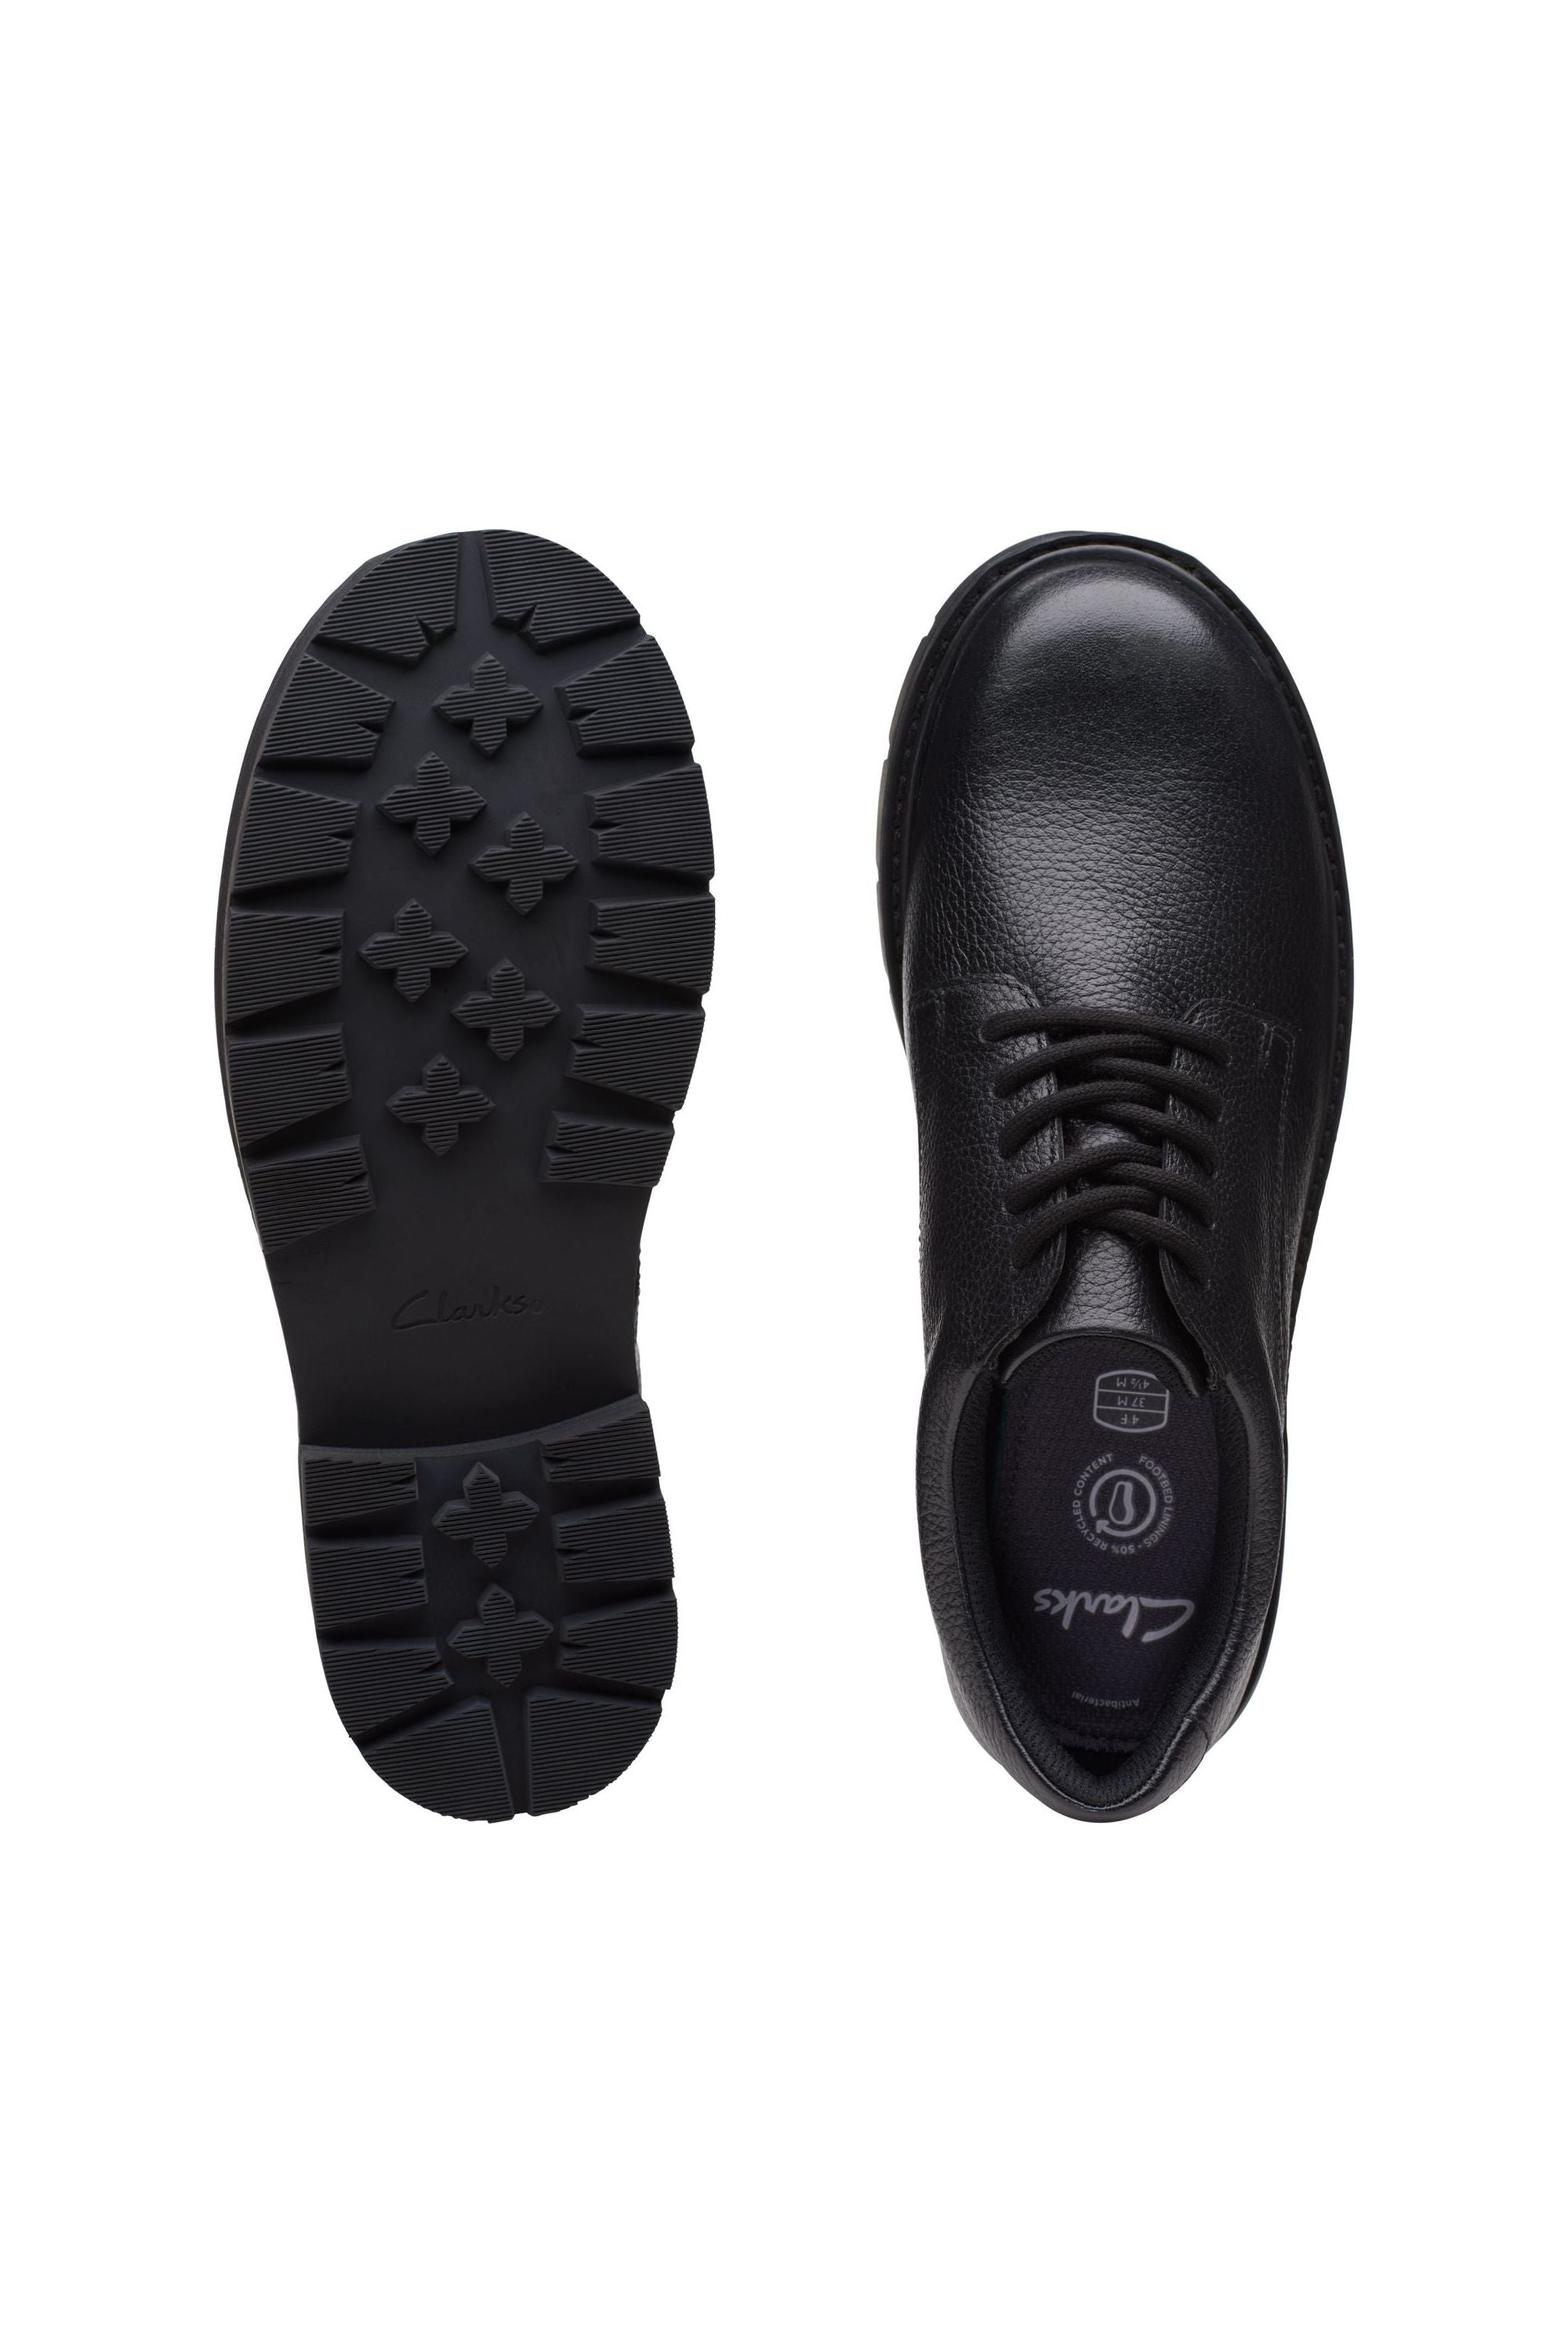 Clarks Prague Lace. Y in Black Leather